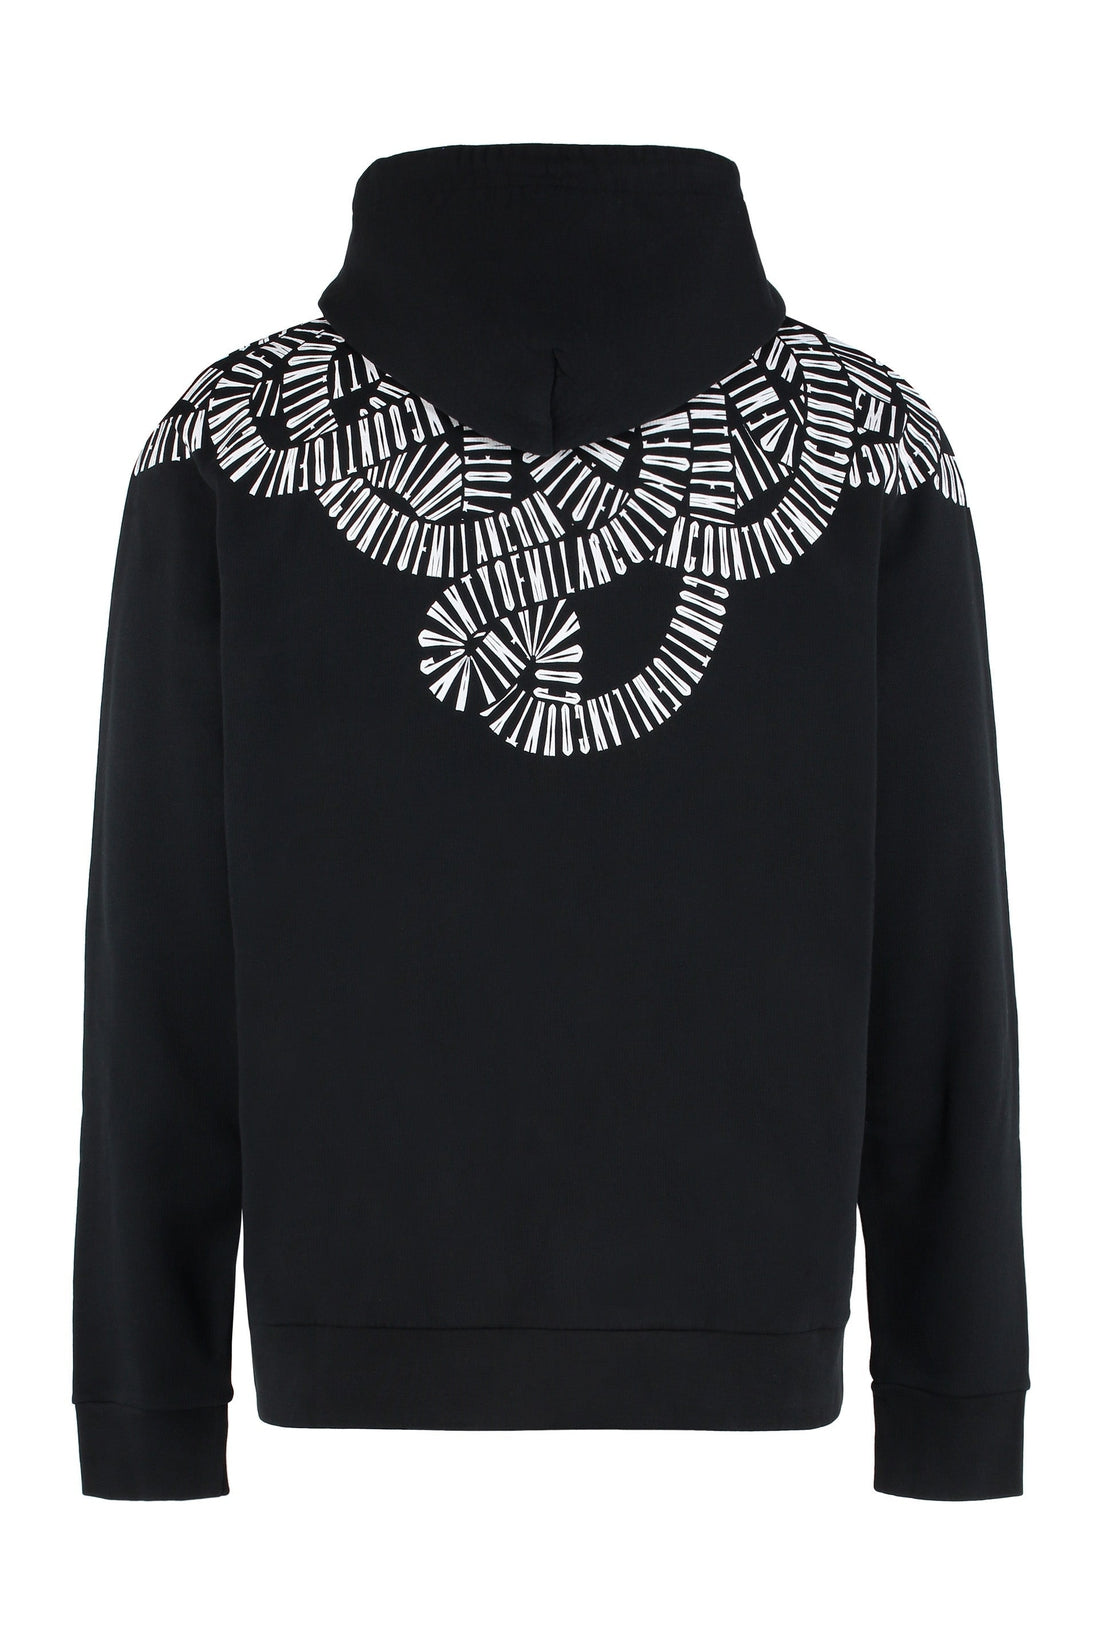 Marcelo Burlon County of Milan-OUTLET-SALE-Printed hoodie-ARCHIVIST